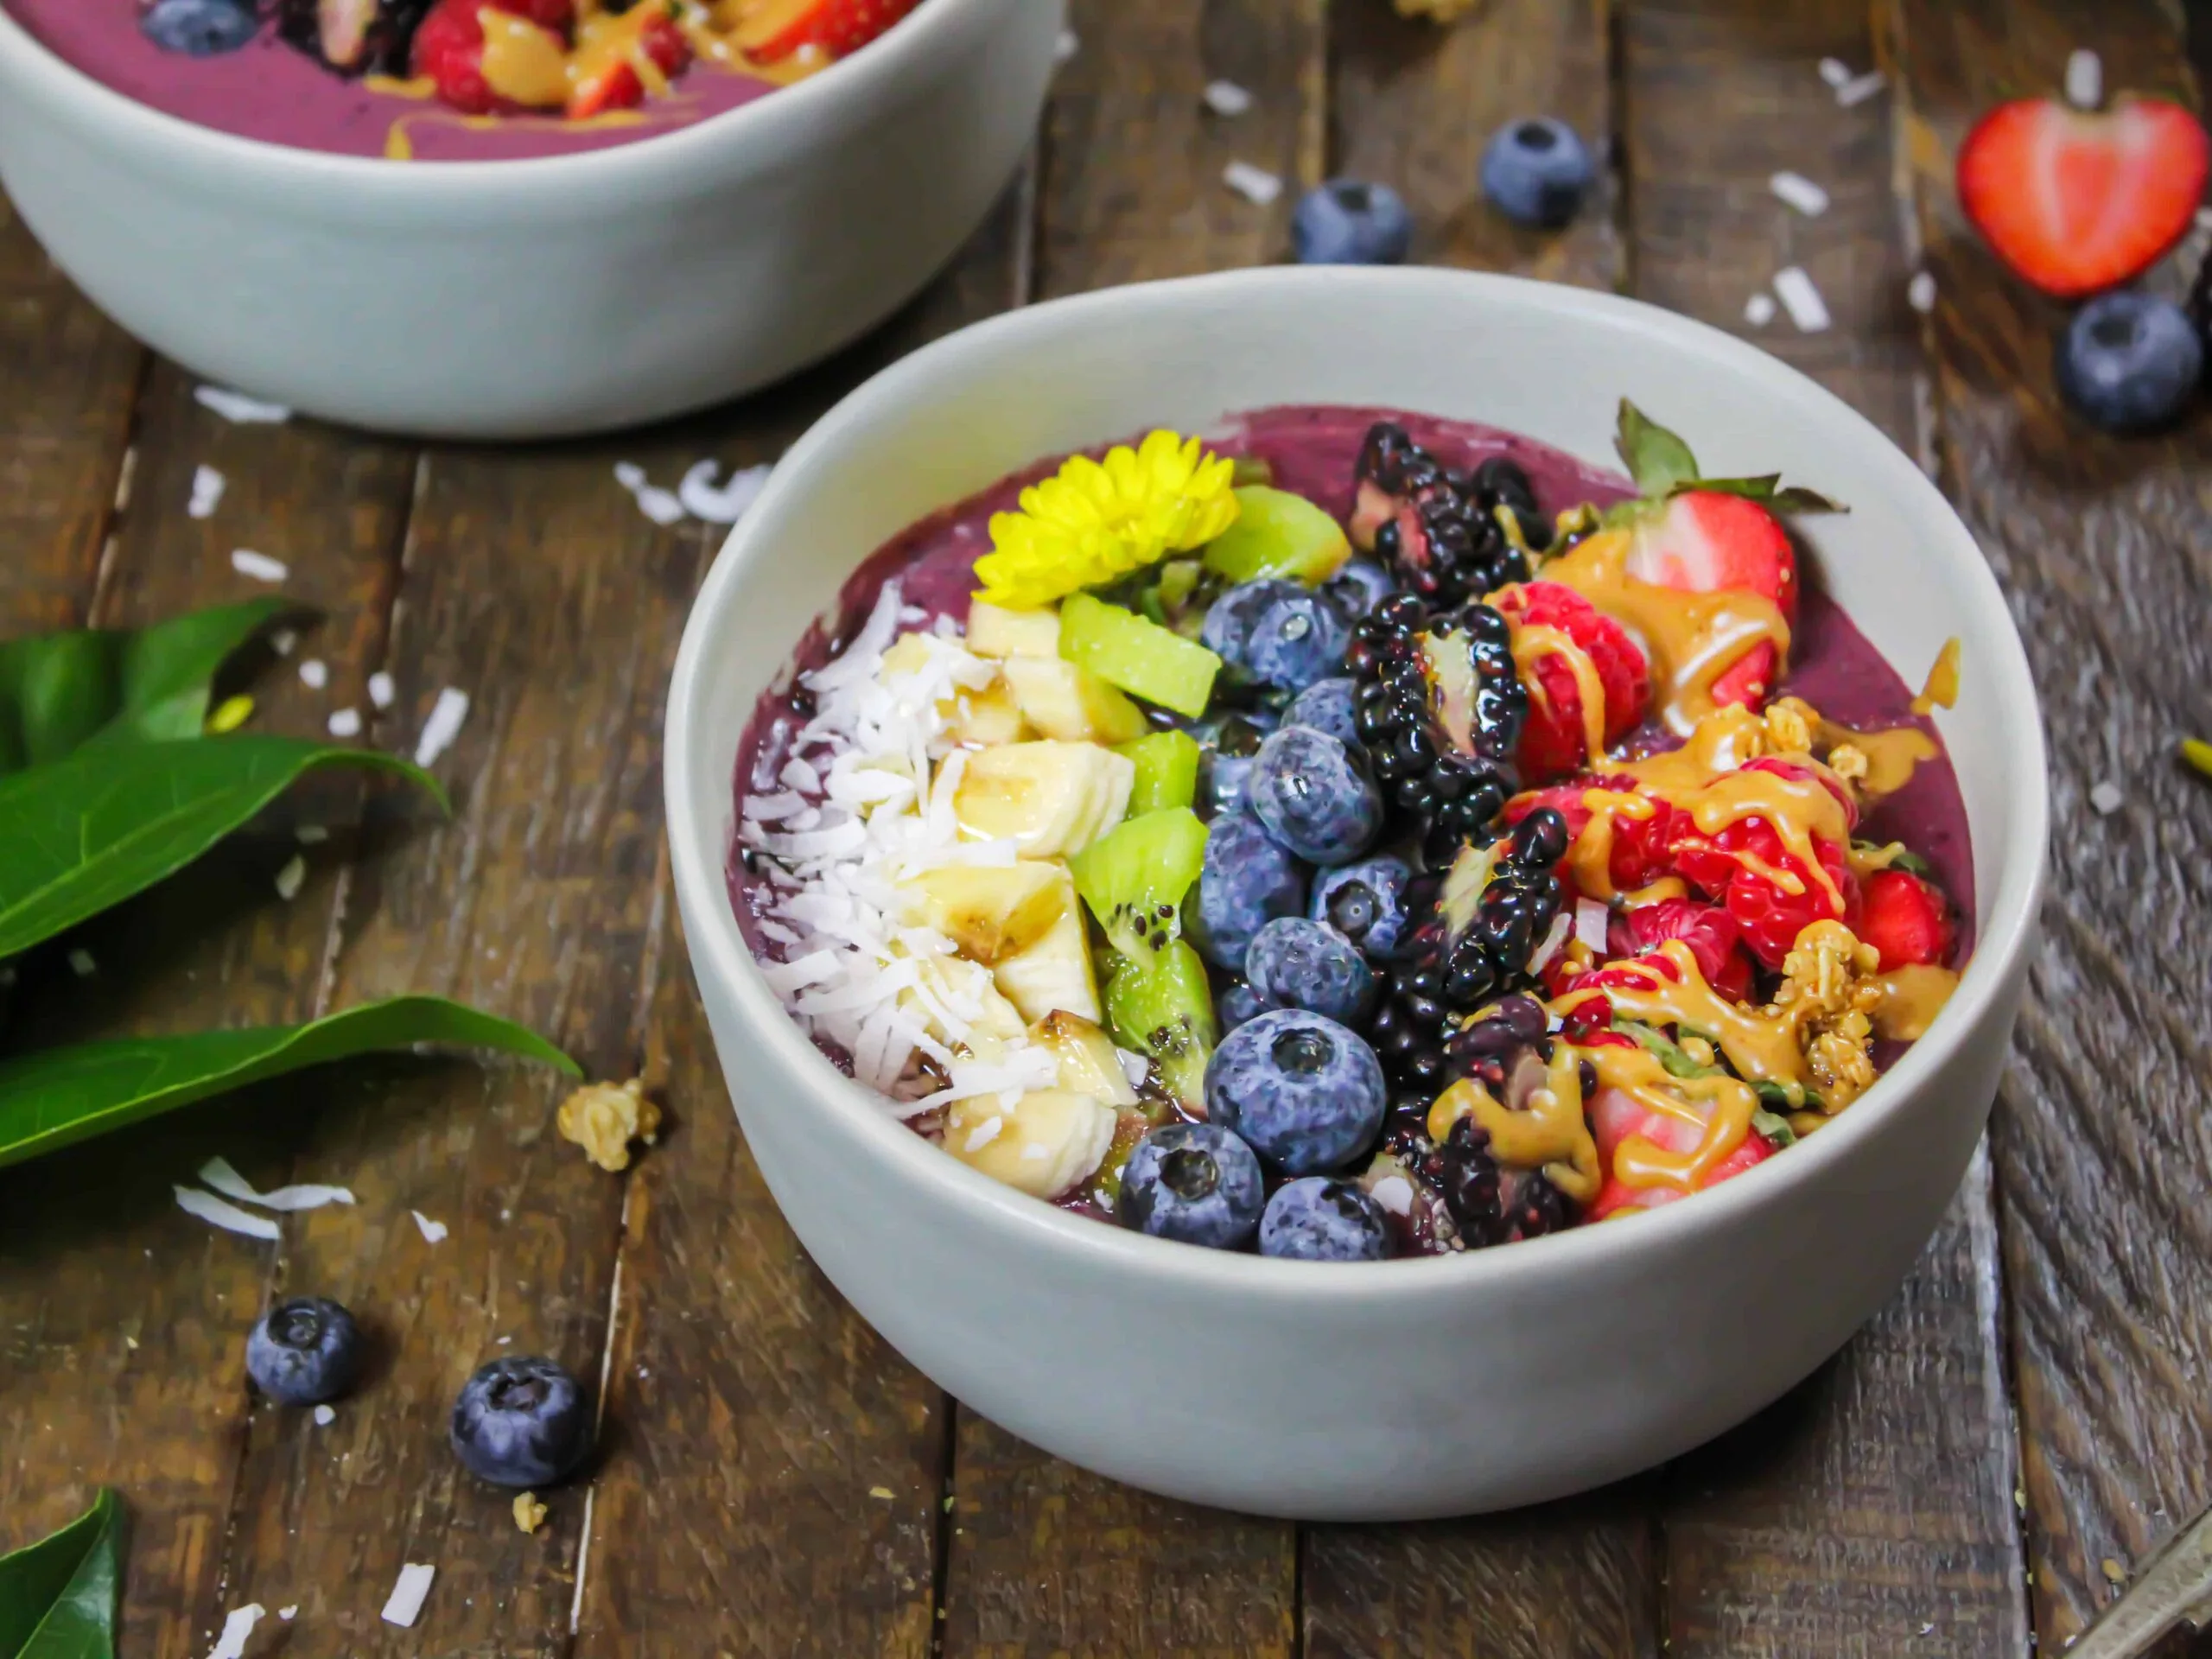 image of an acai bowl made with peanut butter and decorate with fresh fruit, granola, and some edible flowers